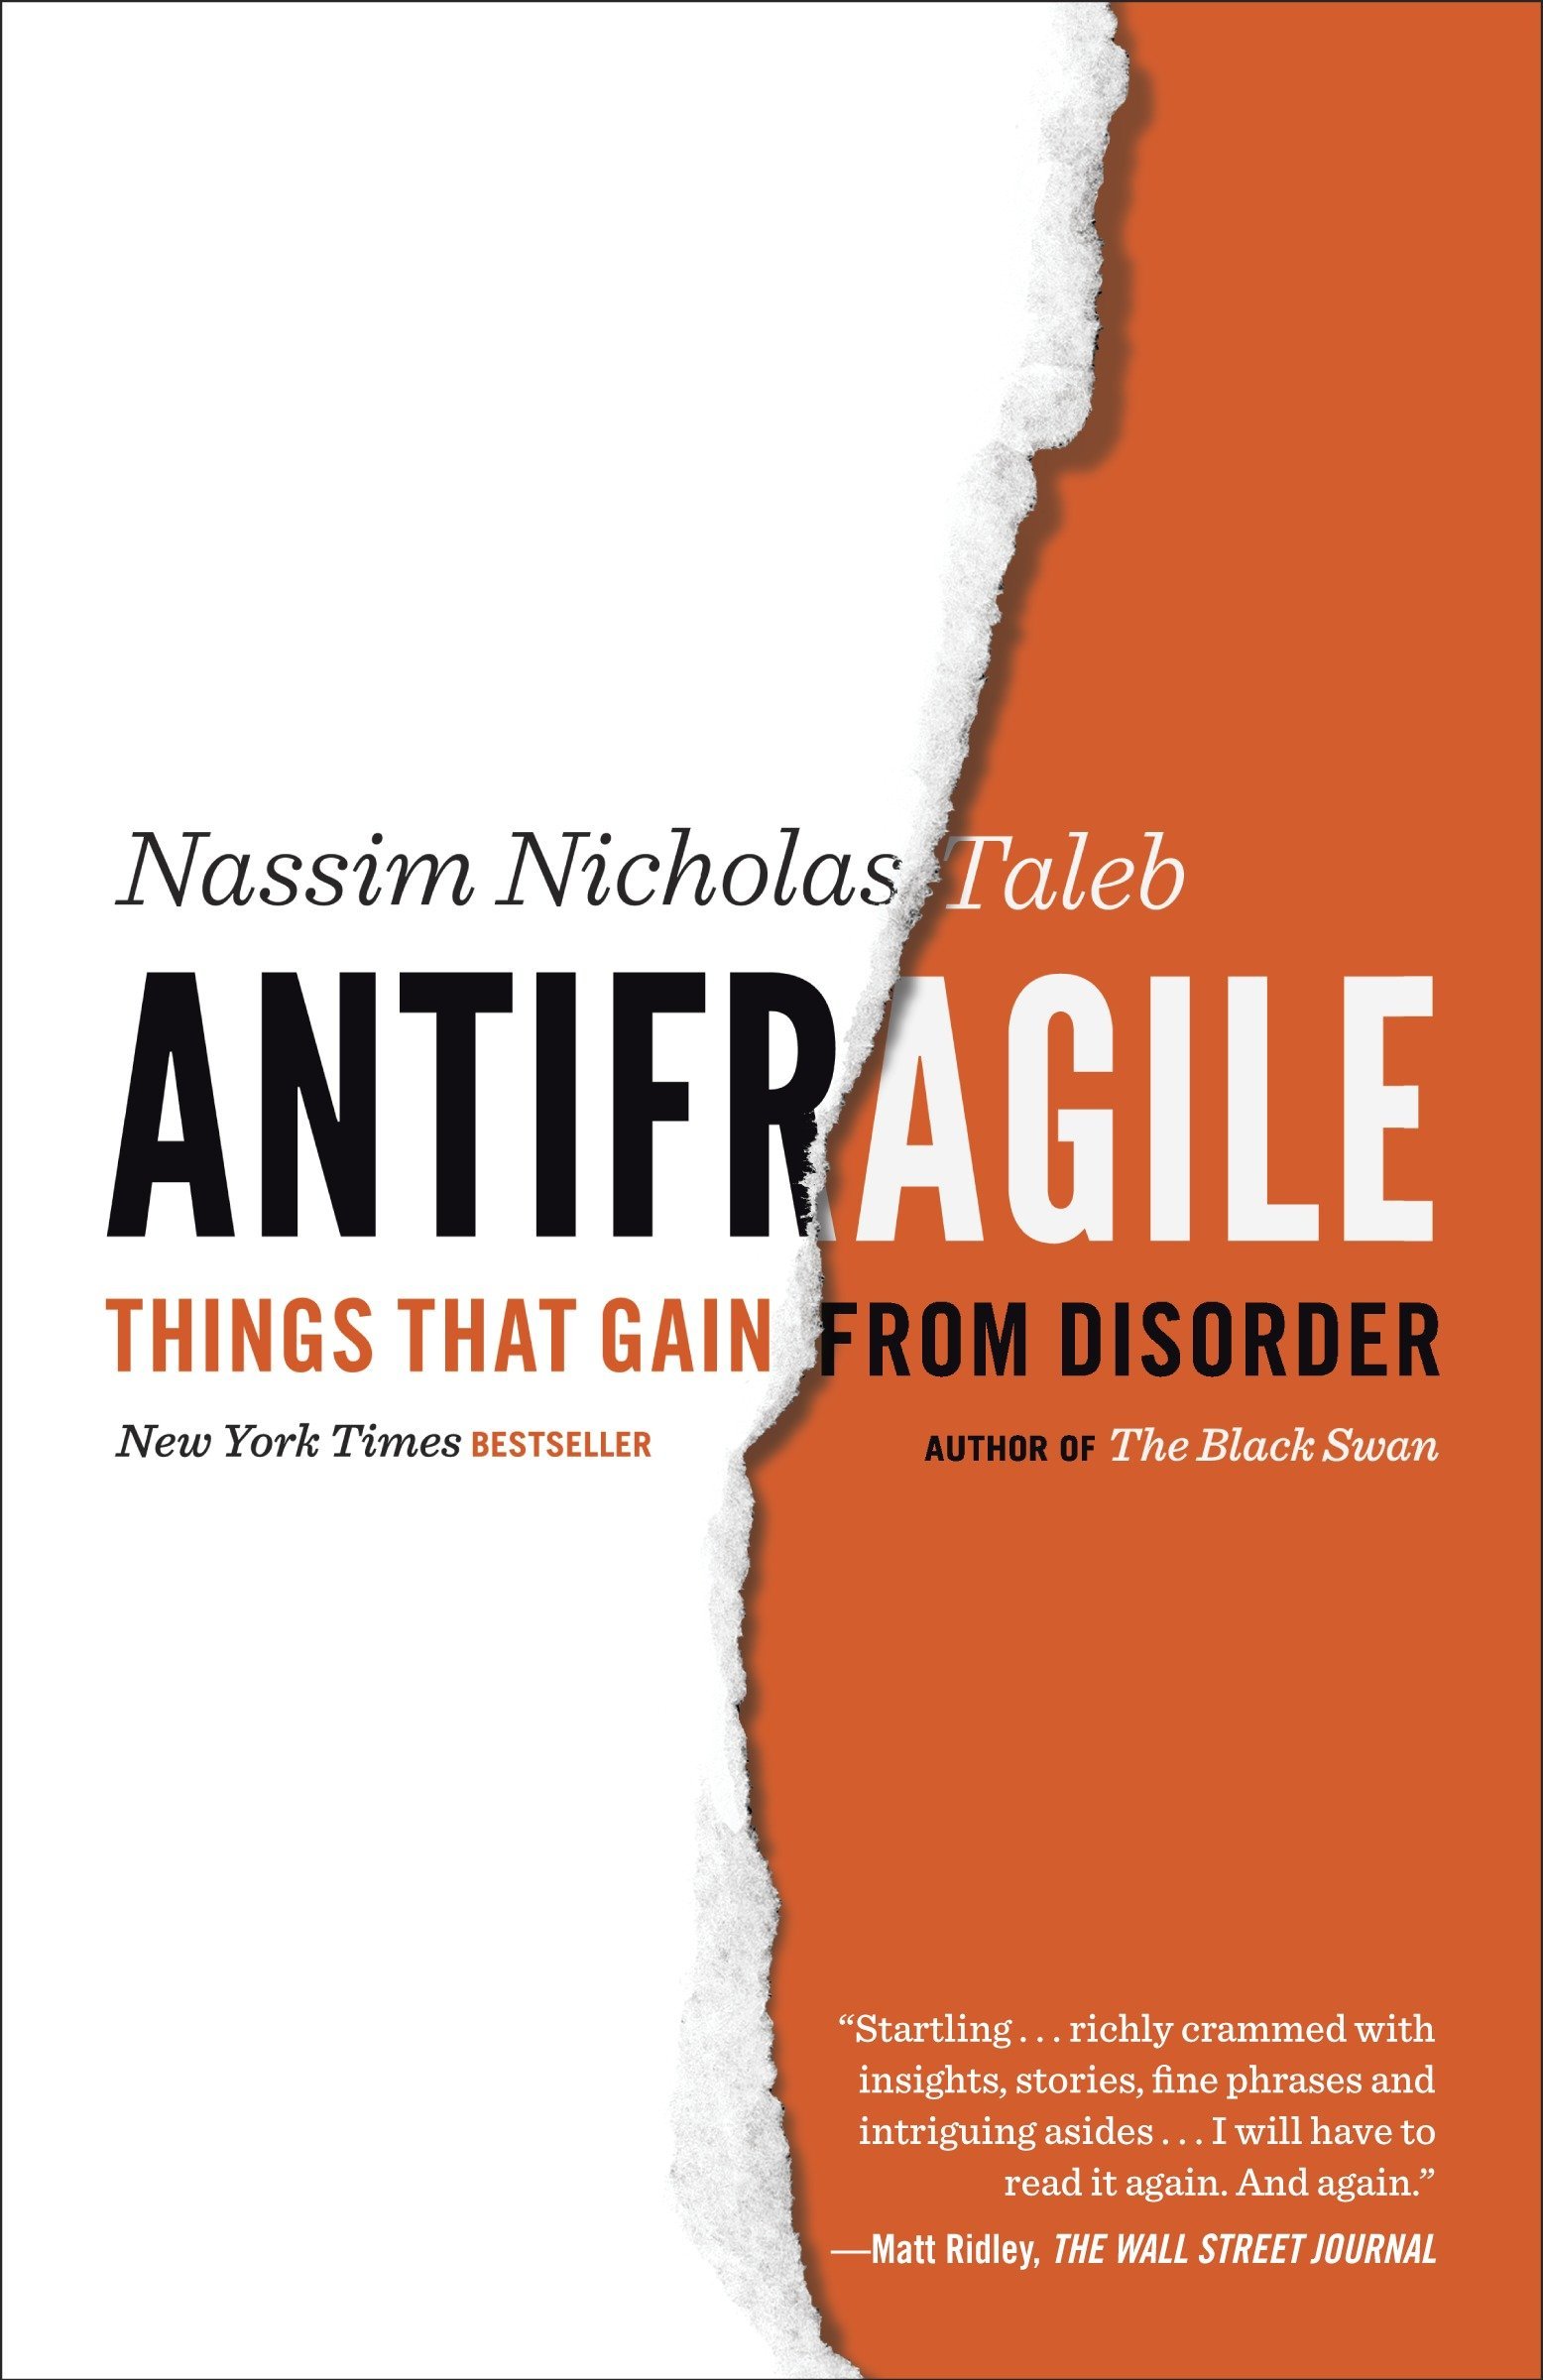 The book cover for Antifragile.